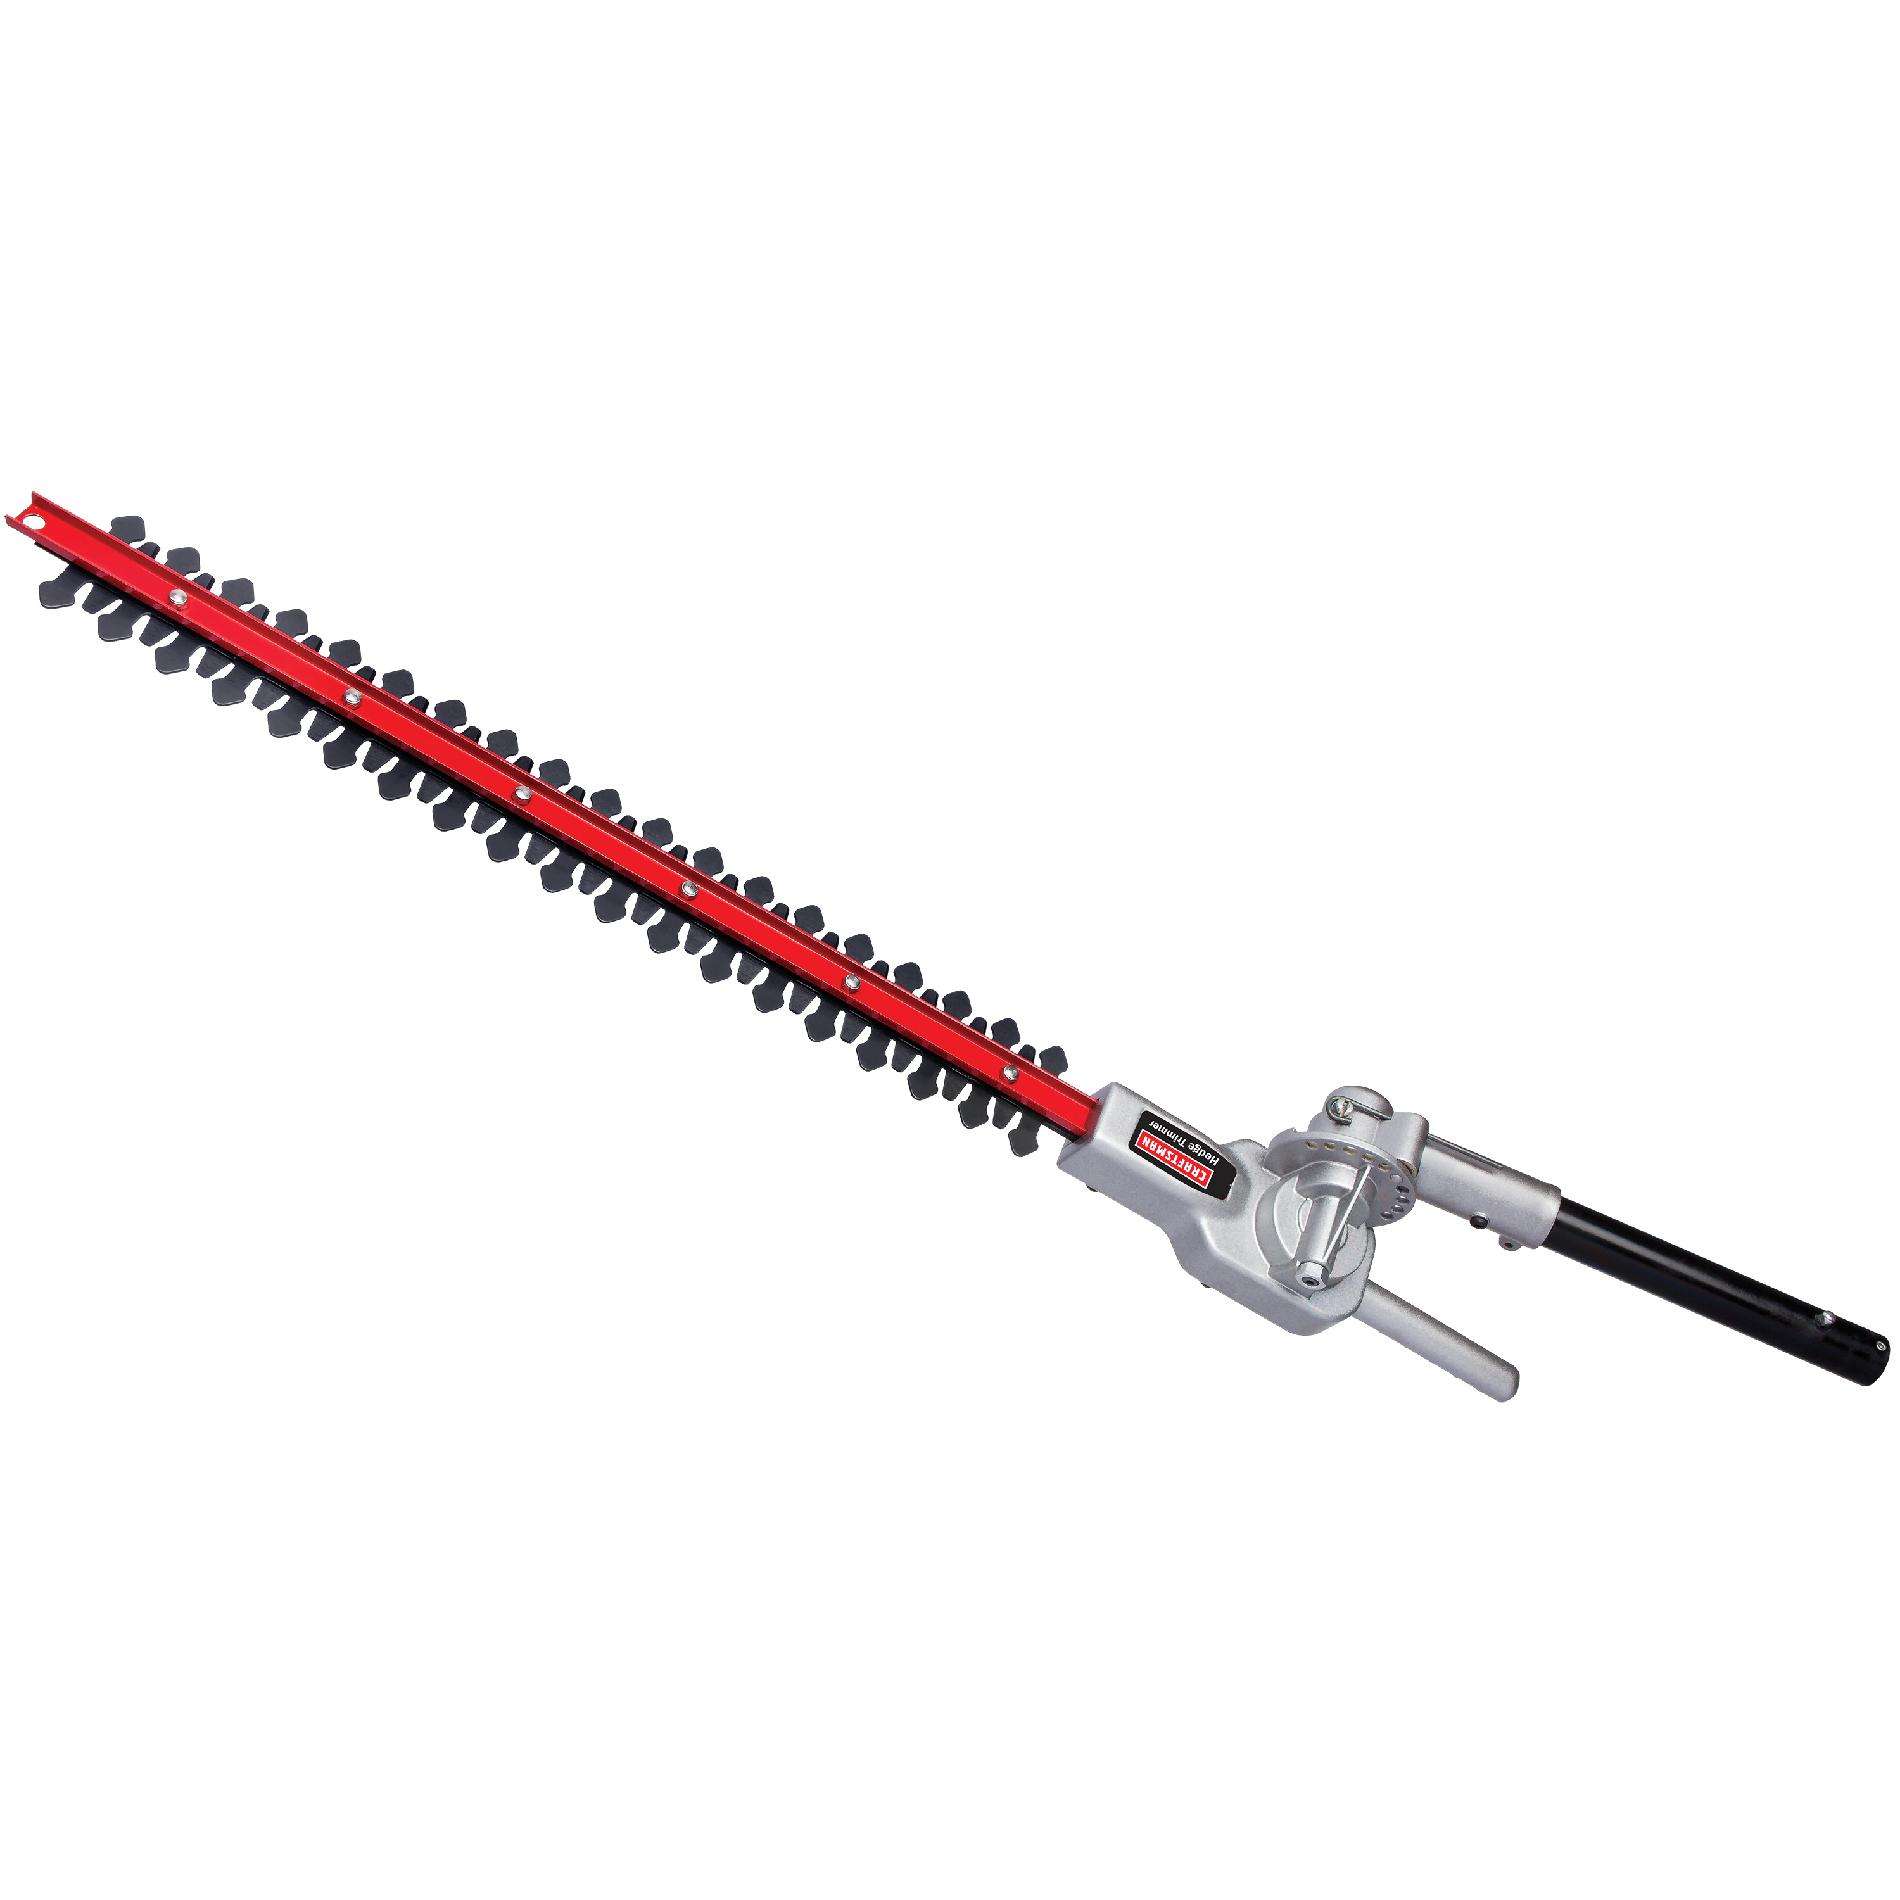 craftsman electric hedge trimmer replacement blades